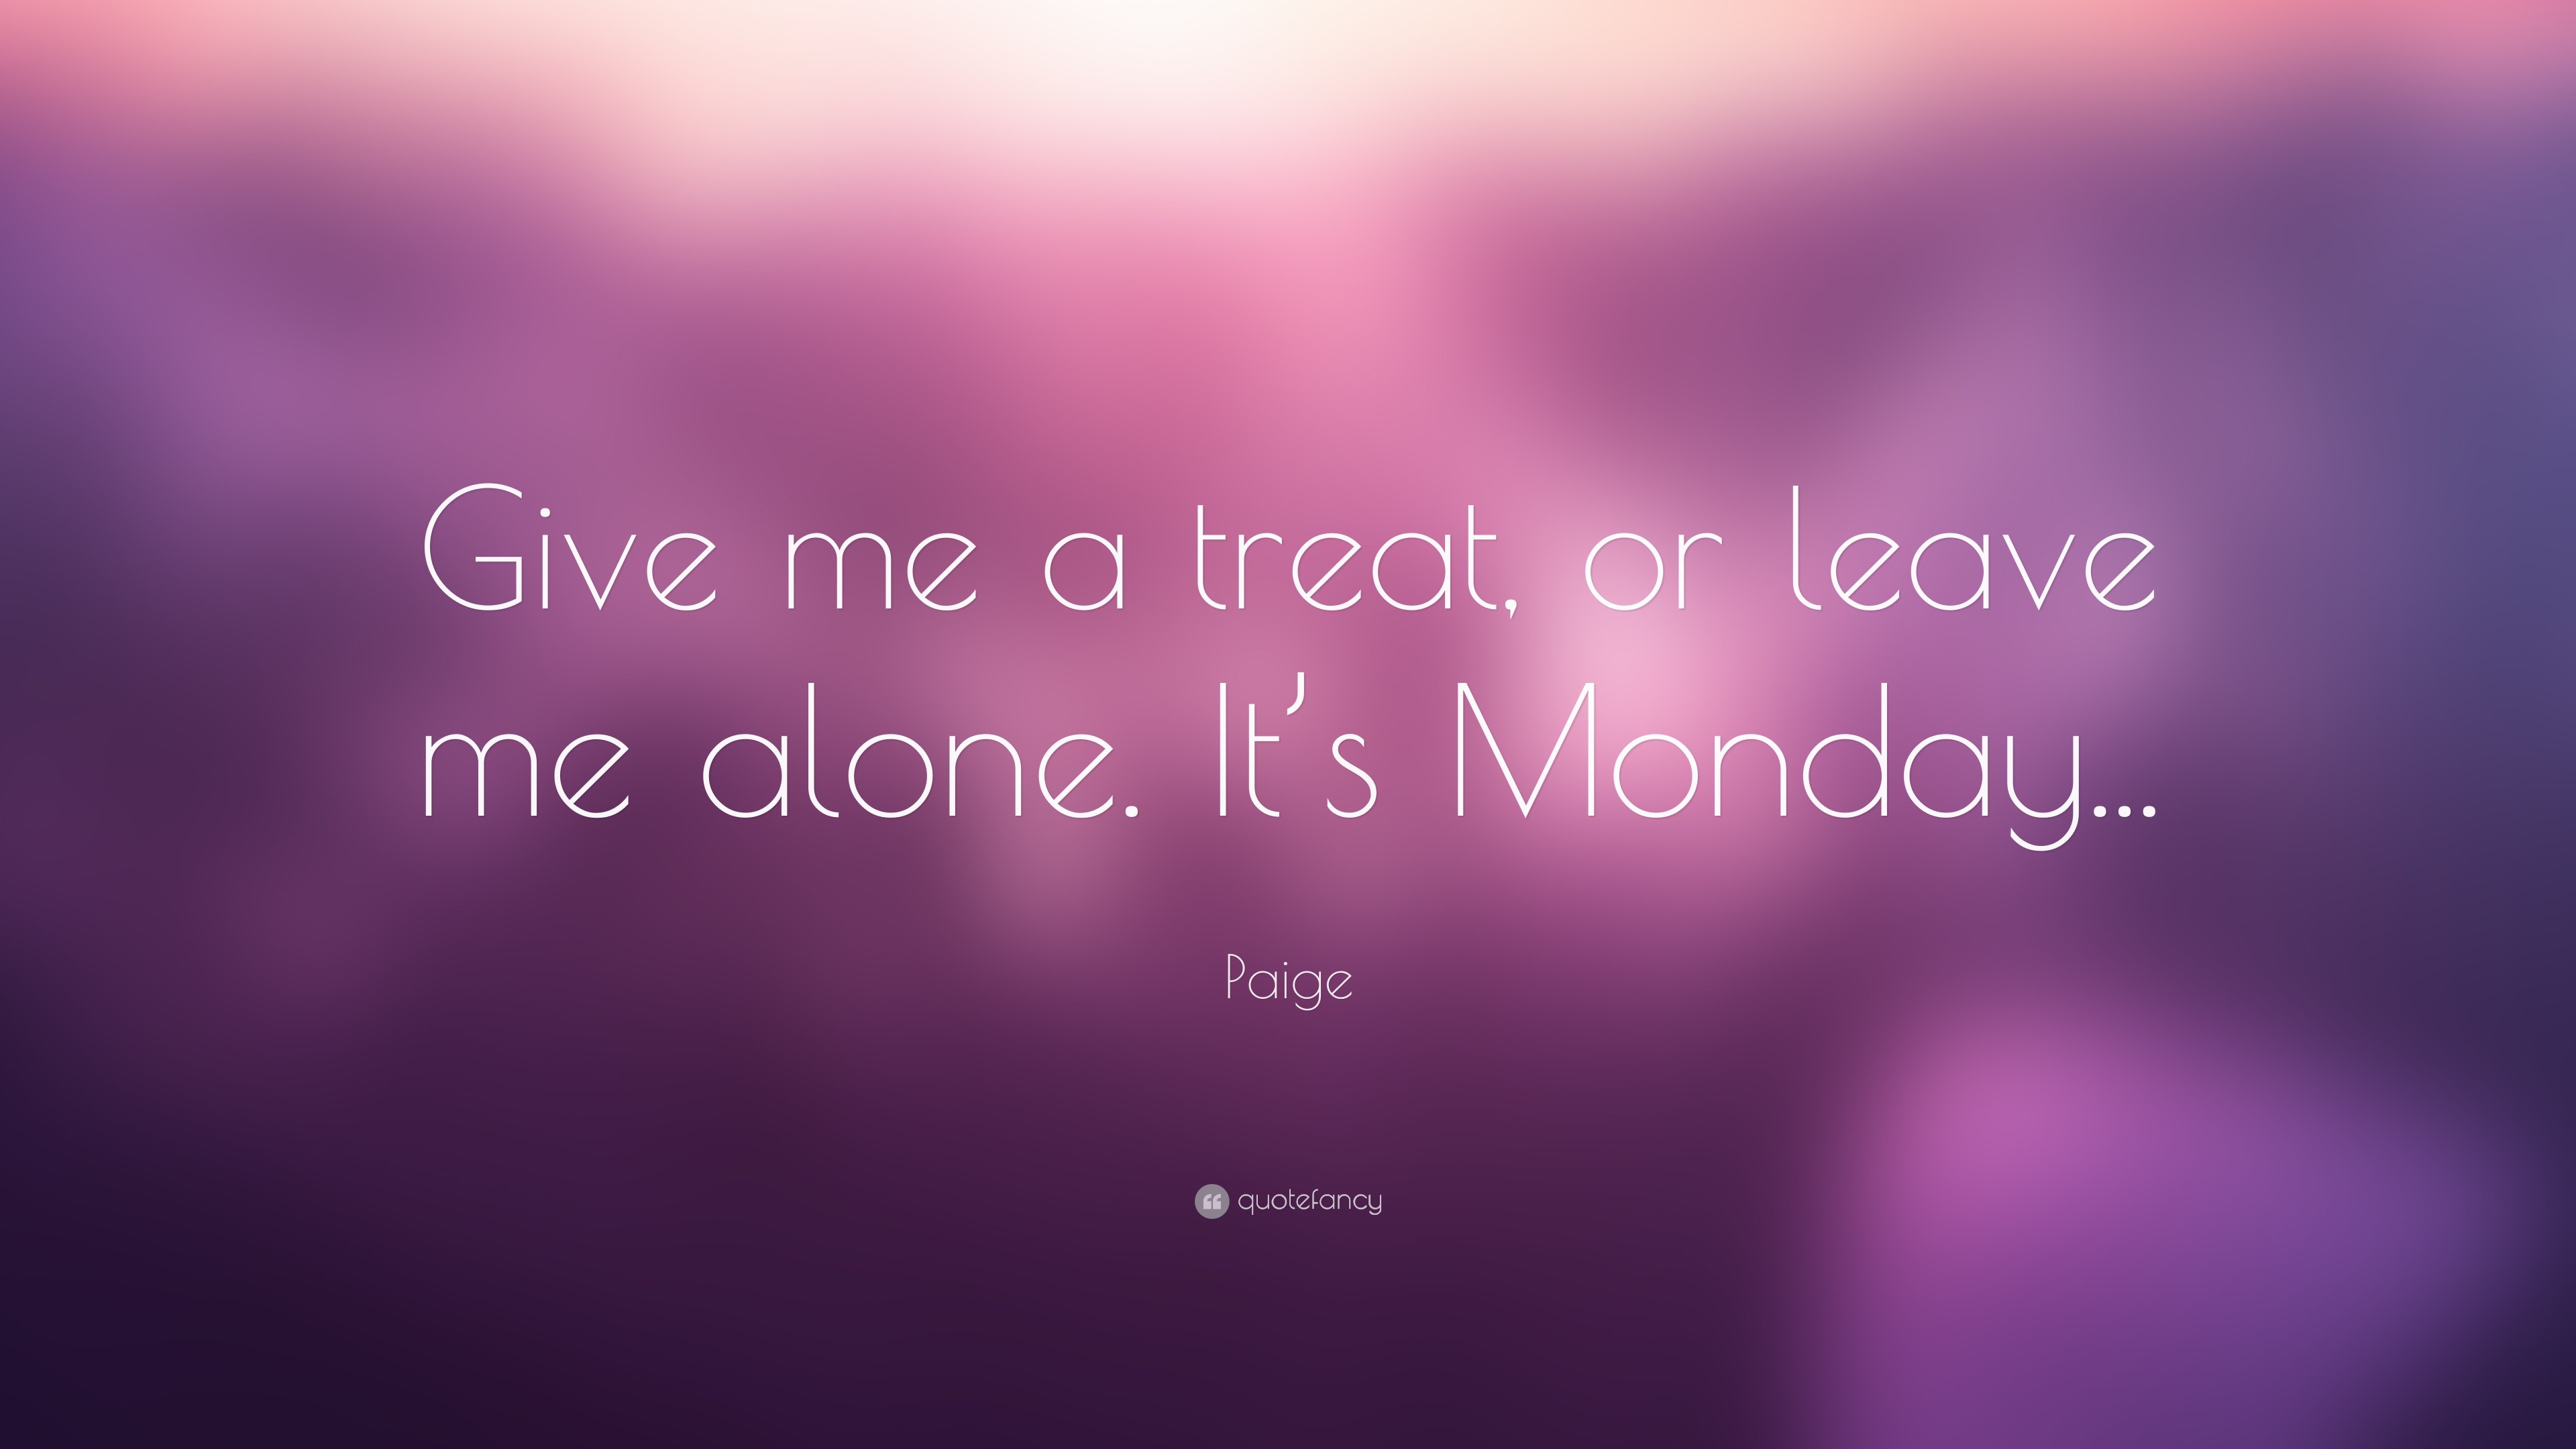 3840x2160 Paige Quote: “Give me a treat, or leave me alone. It's Monday